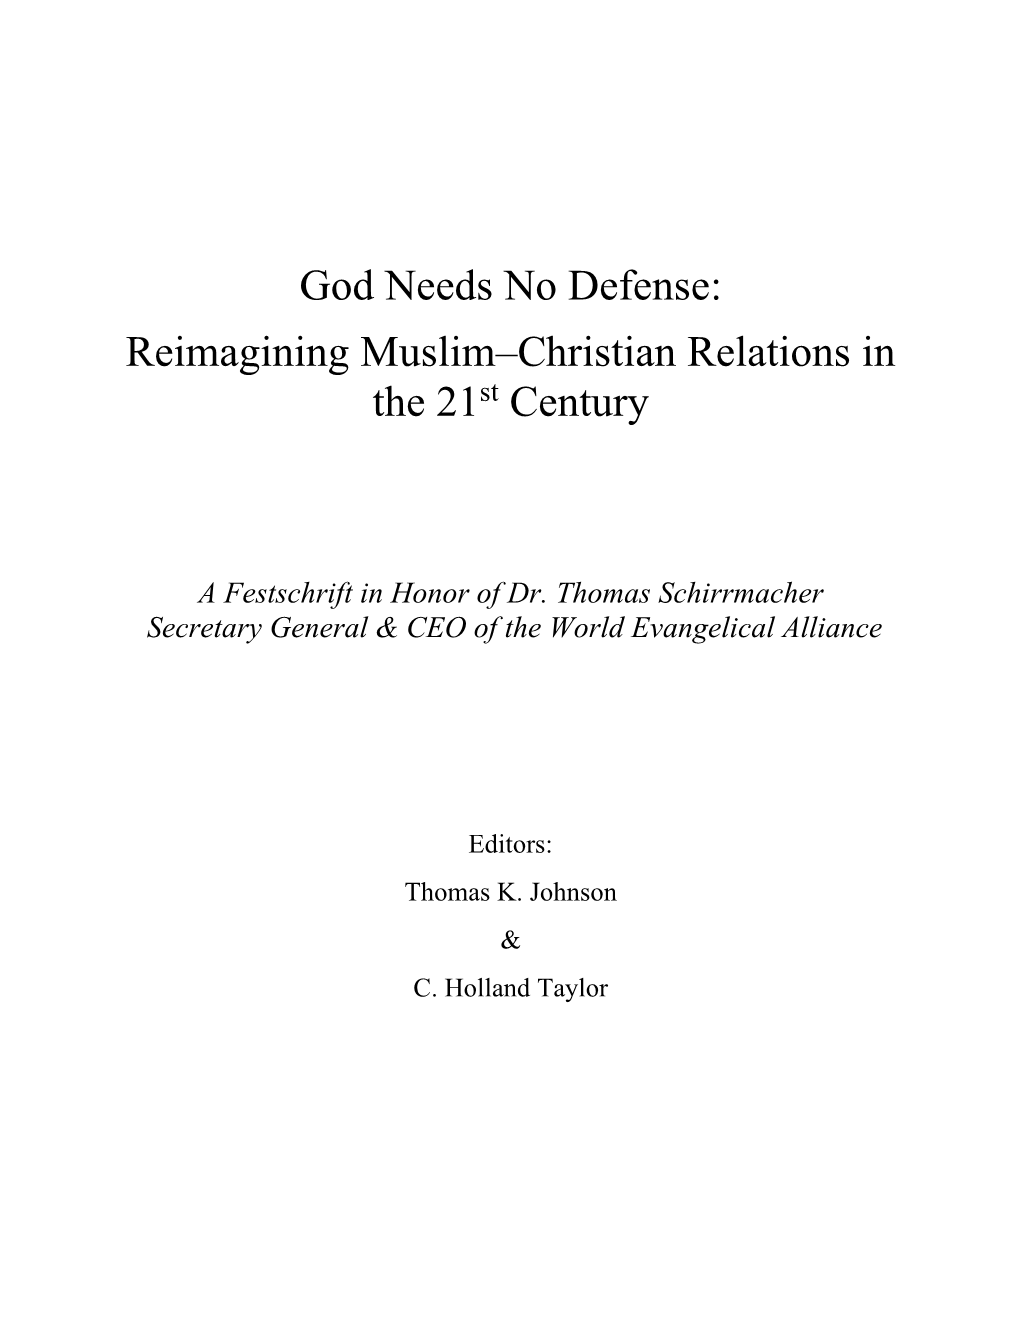 God Needs No Defense: Reimagining Muslim–Christian Relations in the 21St Century